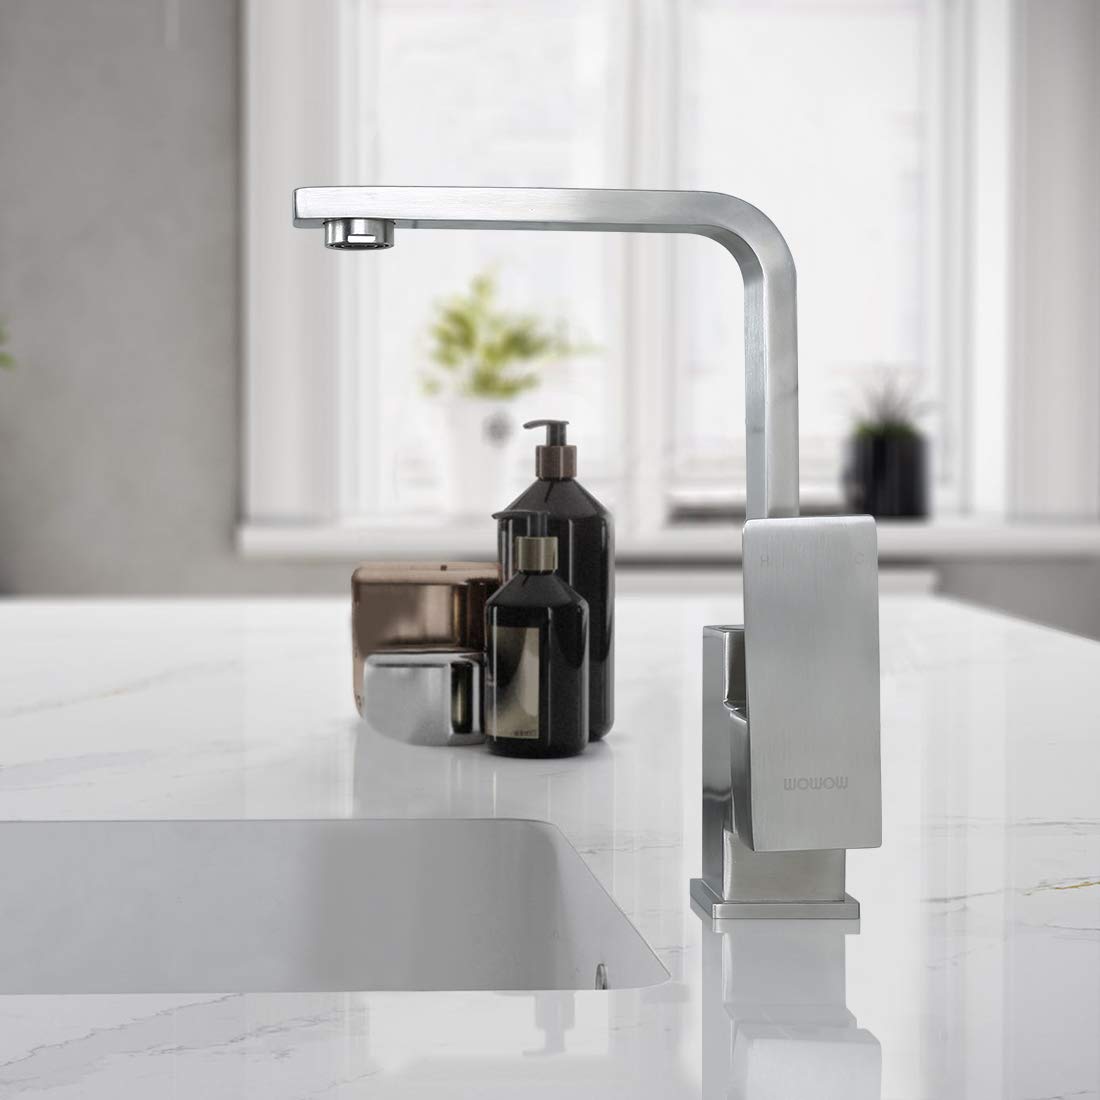 WOWOW Bar Faucets Stainless Steel Modern Bar Sink Faucet Single Hole Prep Kitchen Faucet Brushed Nickel Single Handle Lavatory Sink Faucet Mixer Small Kitchen Tap